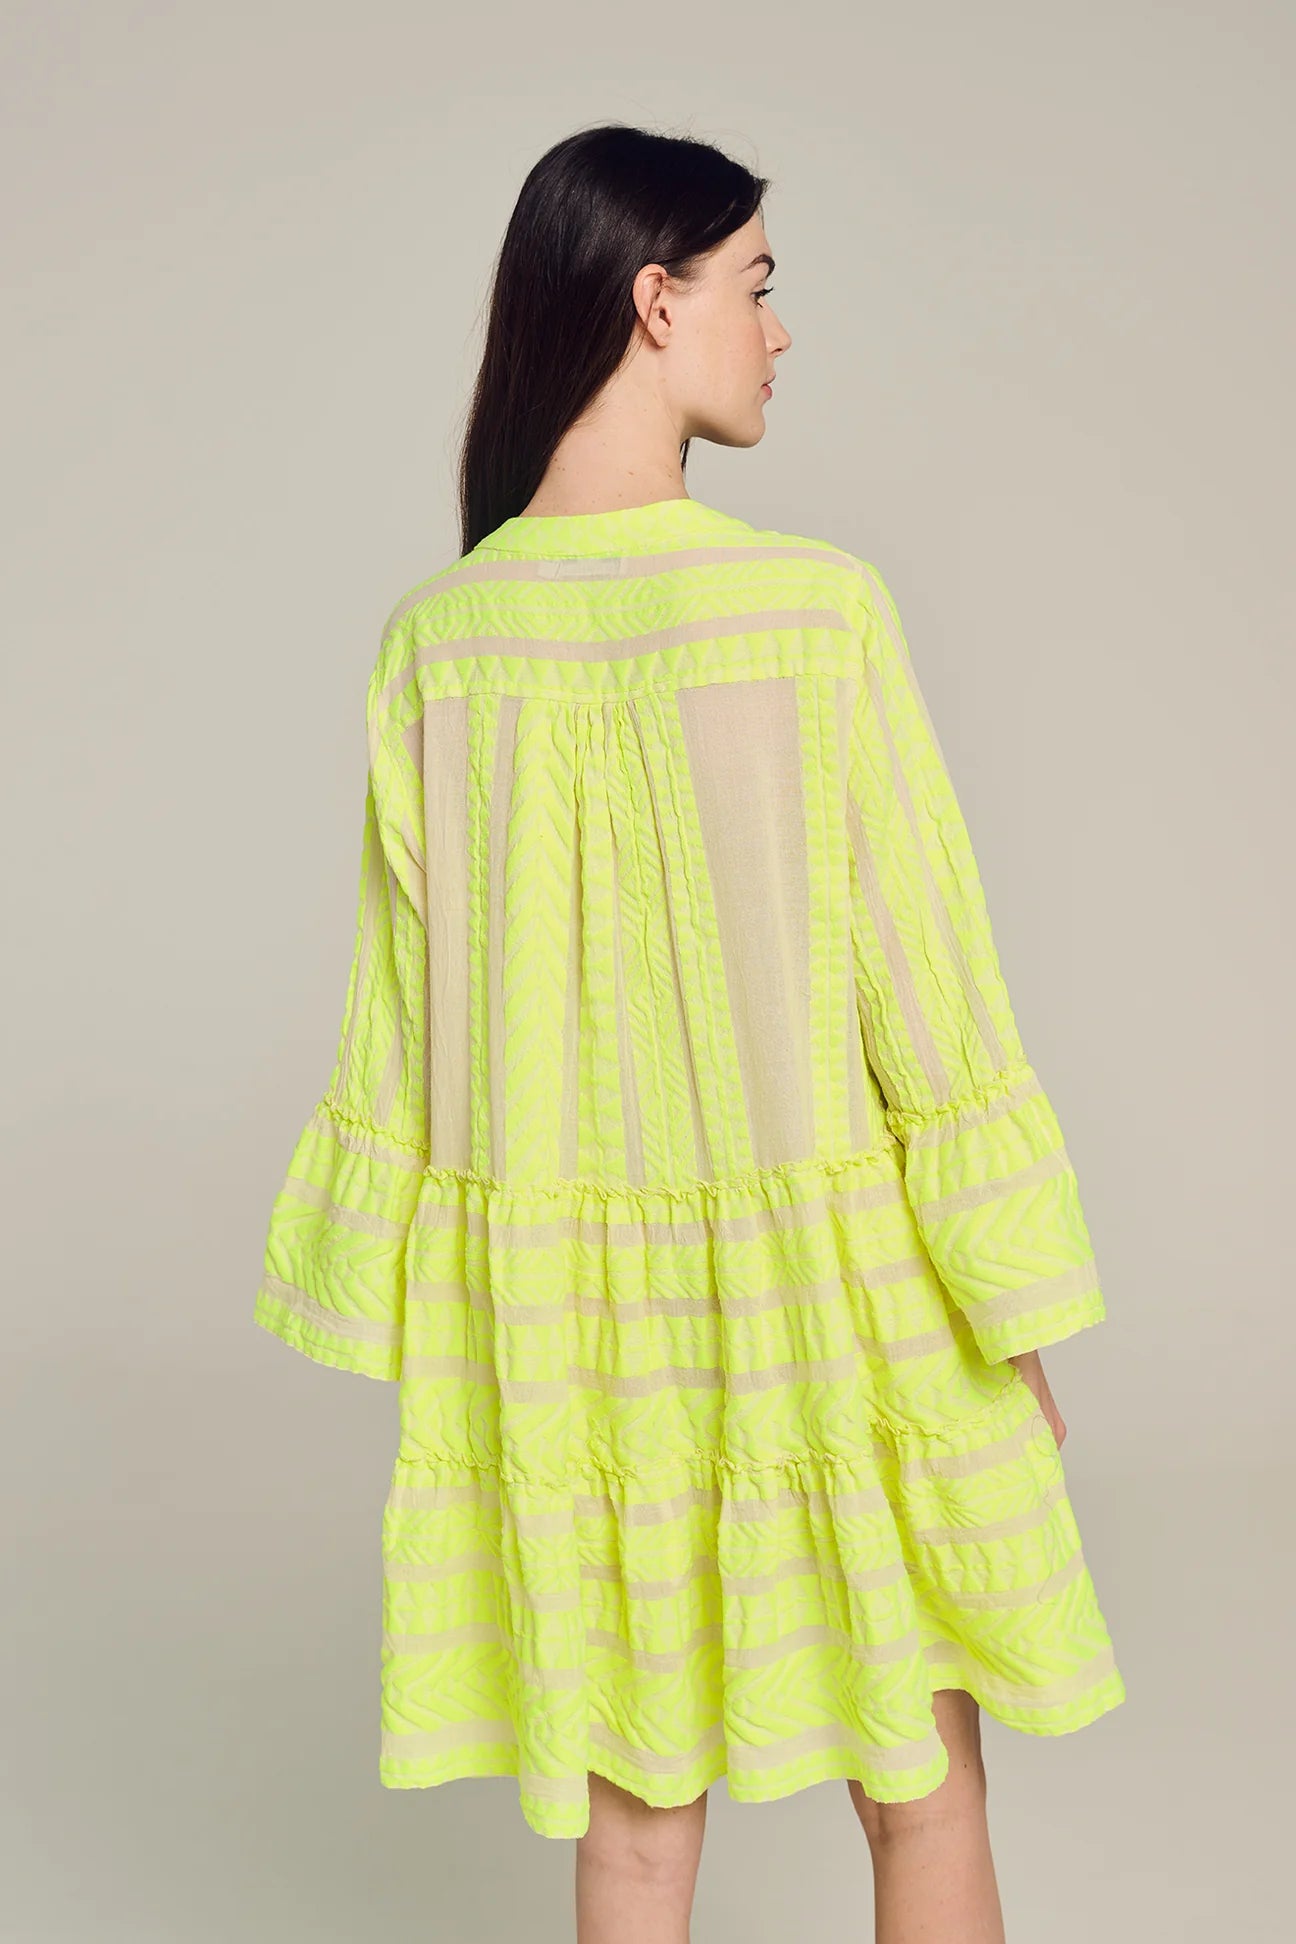 Ecru notch neck above the knee dress with long fluted sleeves and tripe tiered A line skirt with neon lime embroidery throughout